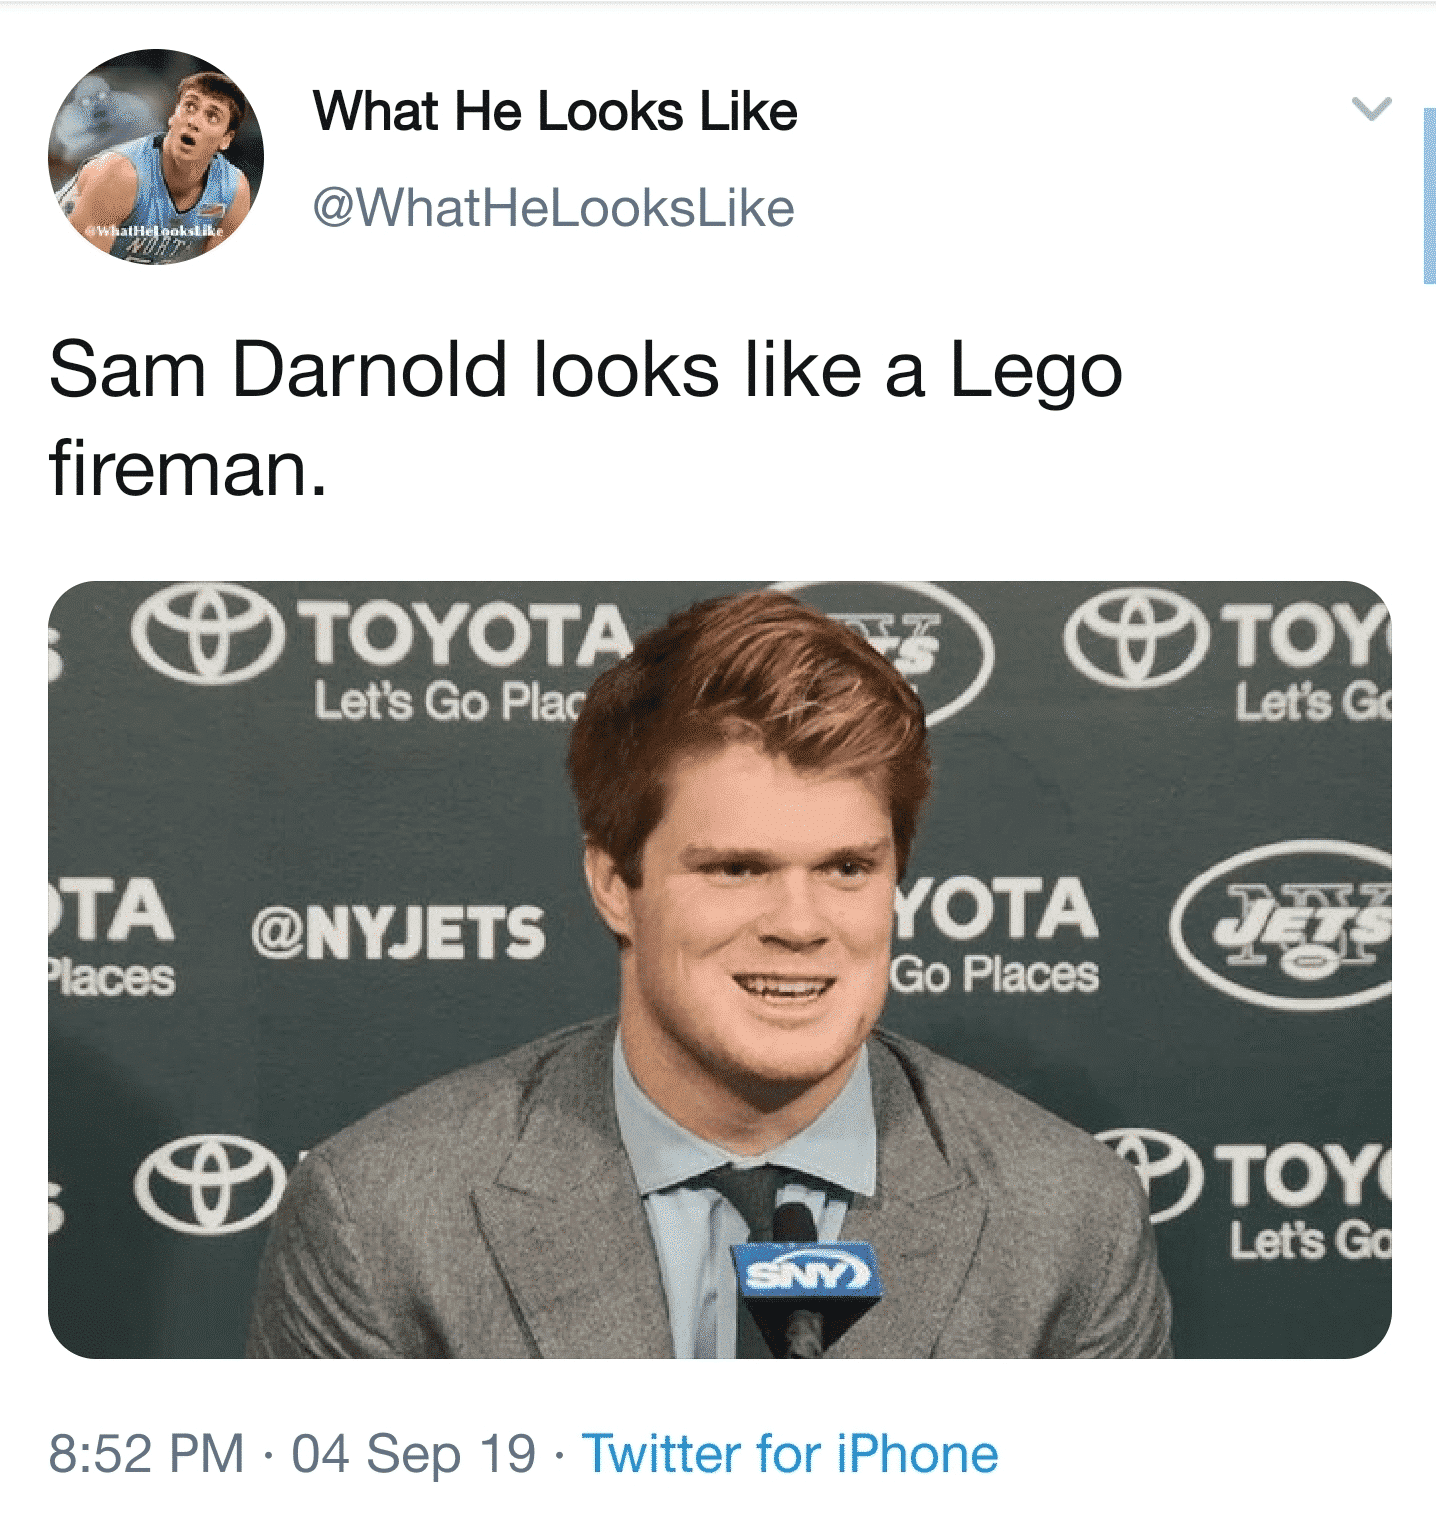 funny tweets funny text: What He Looks Like @WhatHeLooksLike Sam Darnold looks like a Lego fireman. 'TOYOTA Lets Go Plac TA @NYJETS OTA Places TOY 8:52 PM • 04 Sep 19 • Twitter for iPhone 